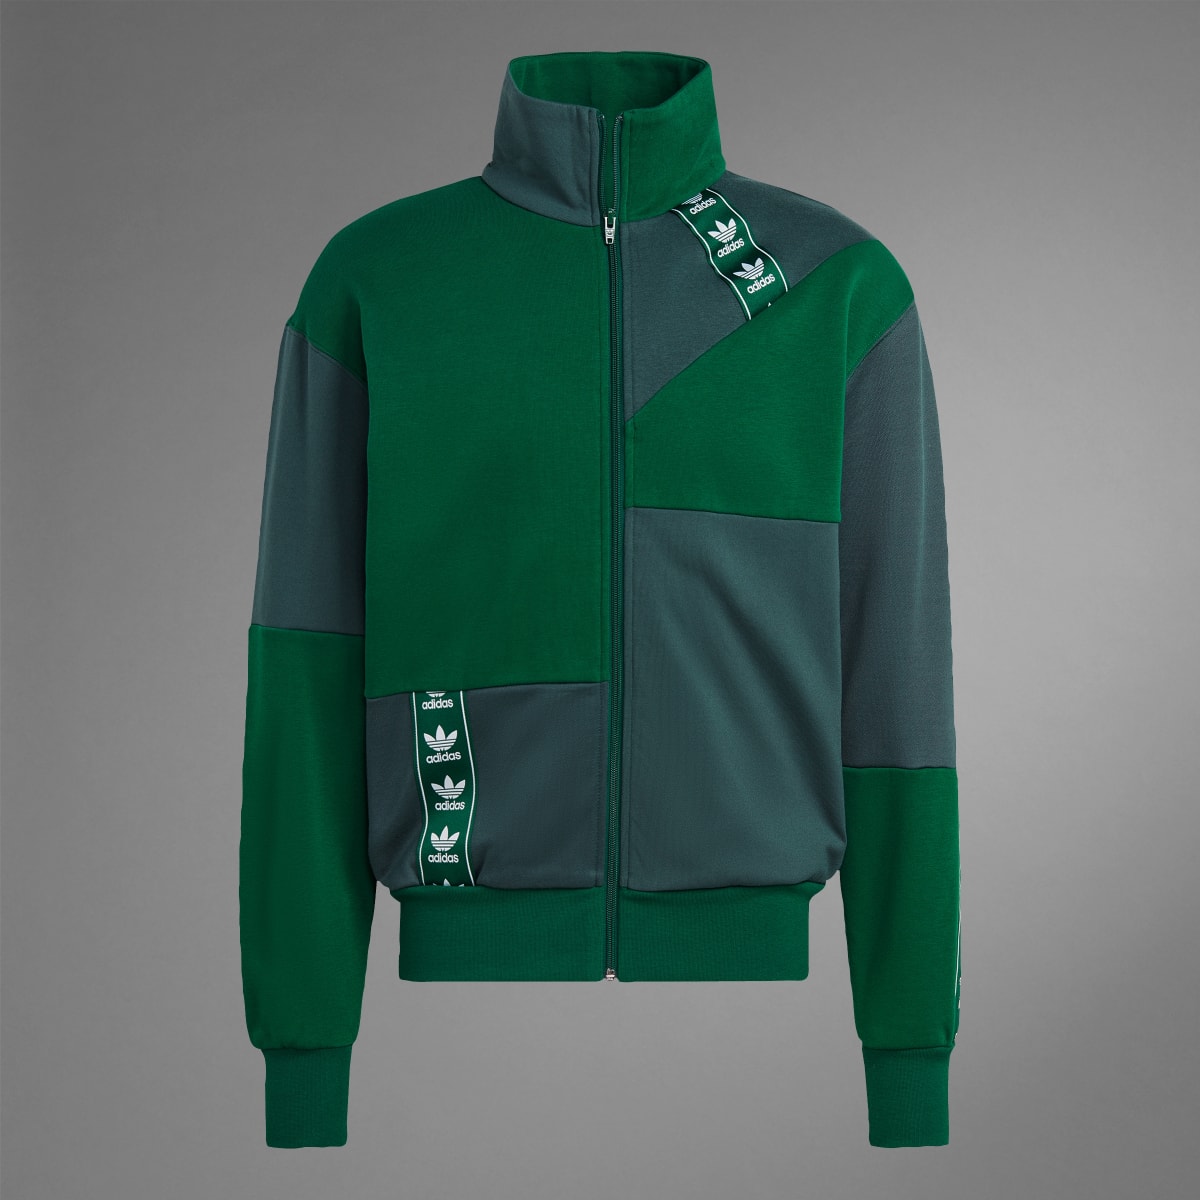 Adidas ADC Patchwork FB Track Top. 10